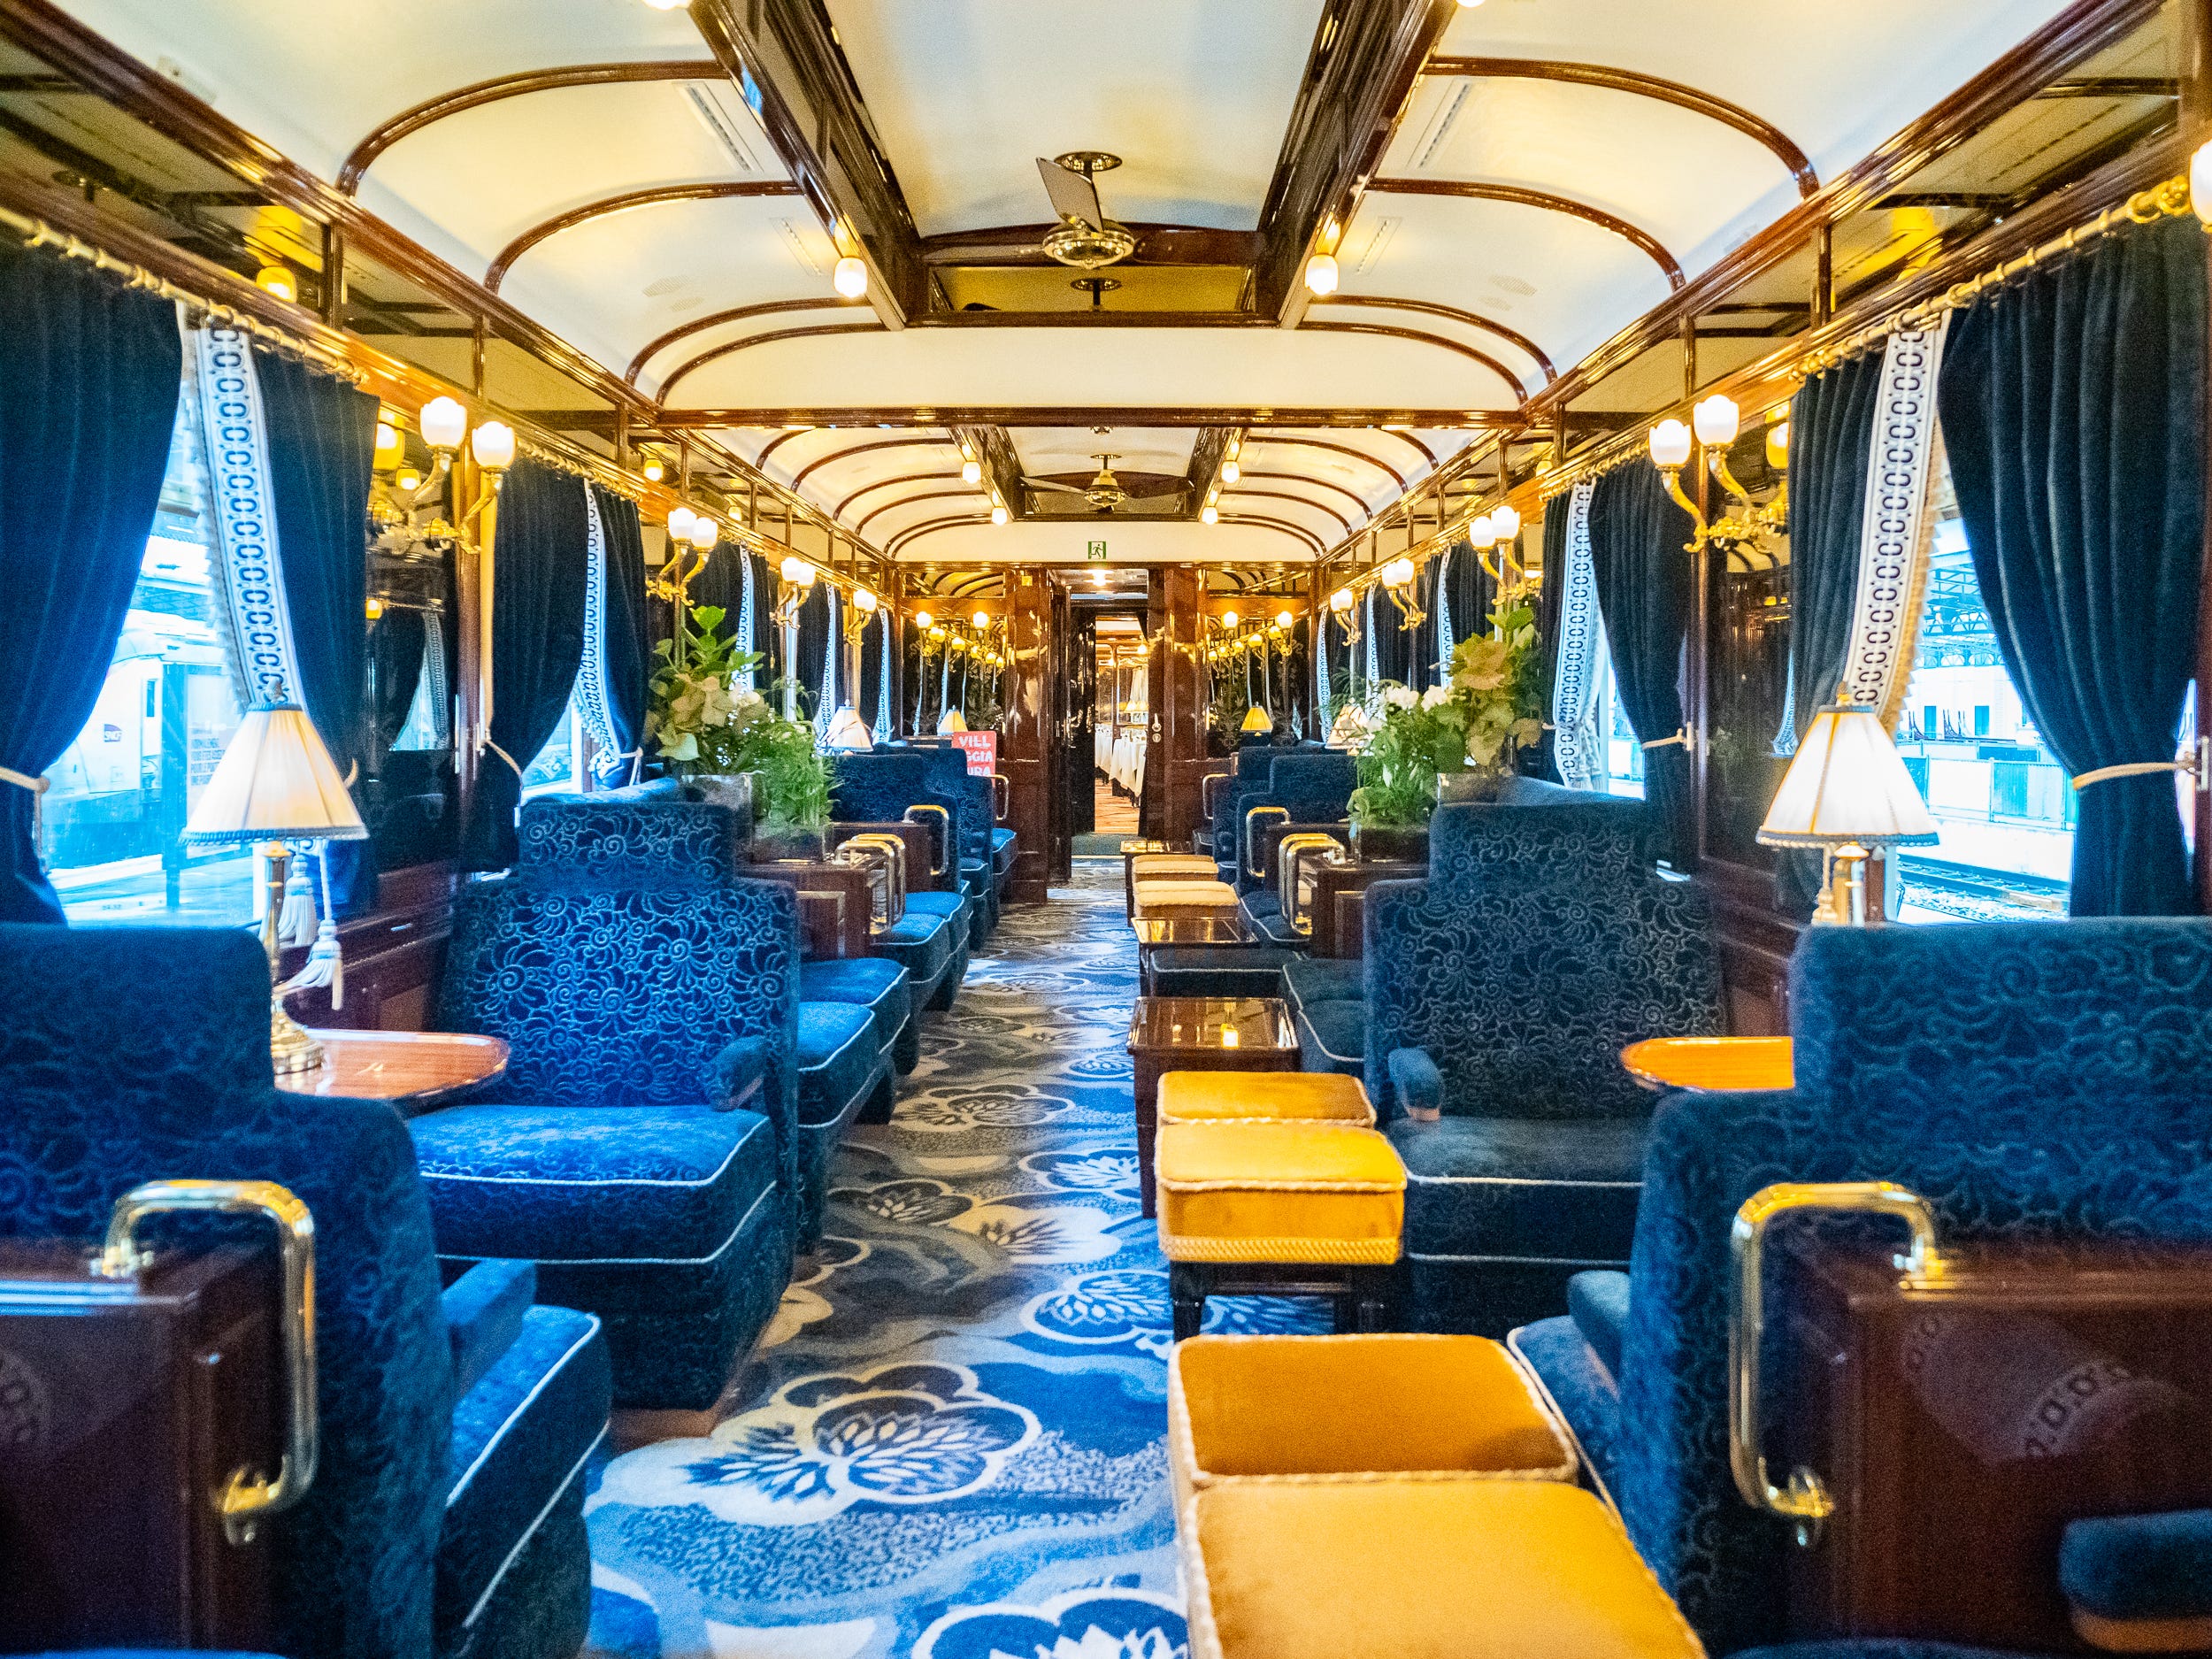 Inside a luxury train's bar car with navy blue seating and curtains